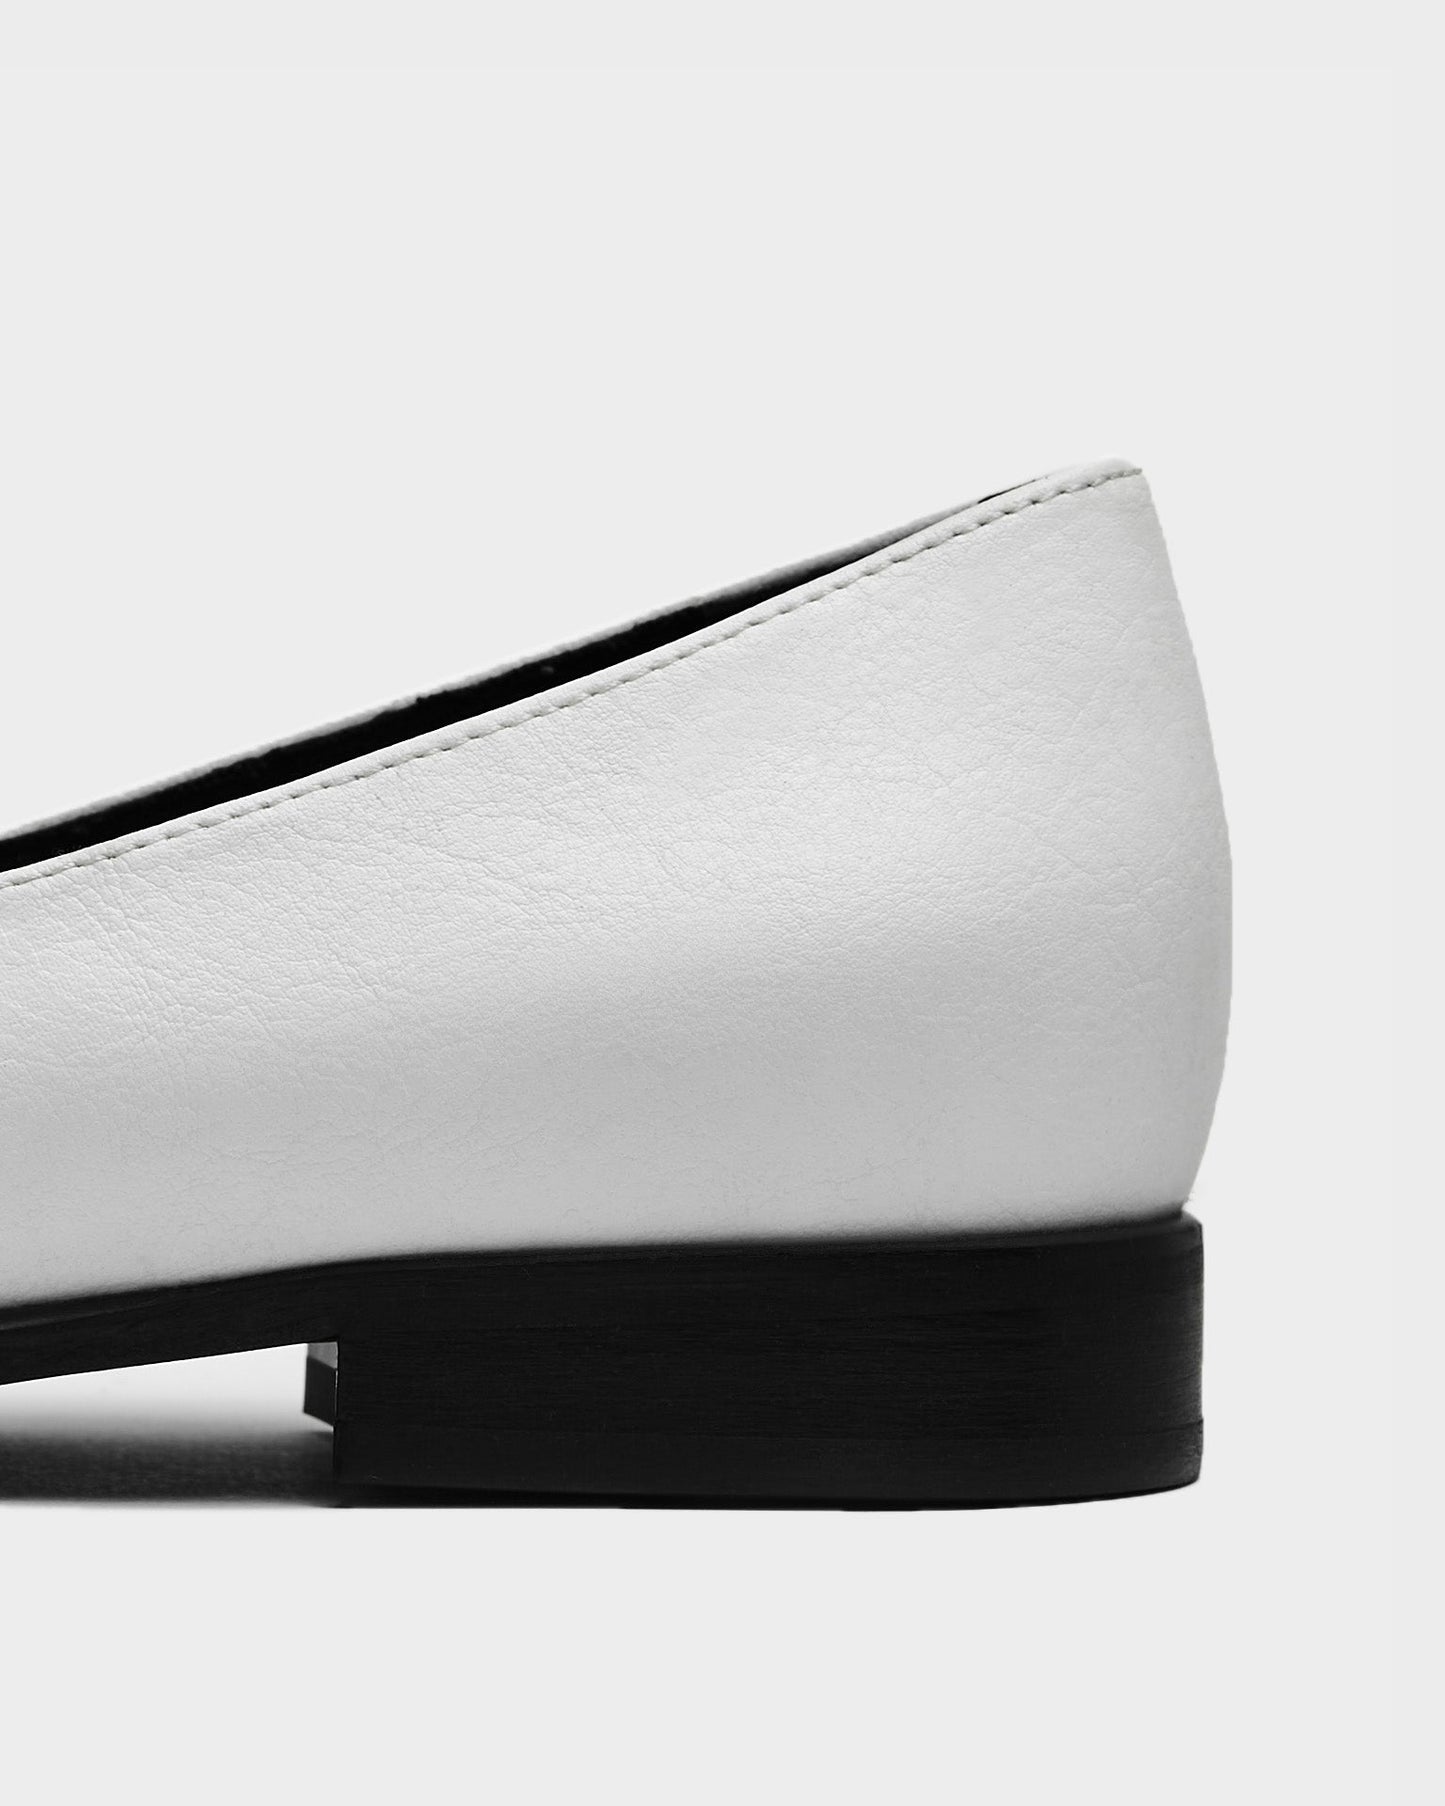 Lords White Loafers made of grape leather Vegea - sample sale